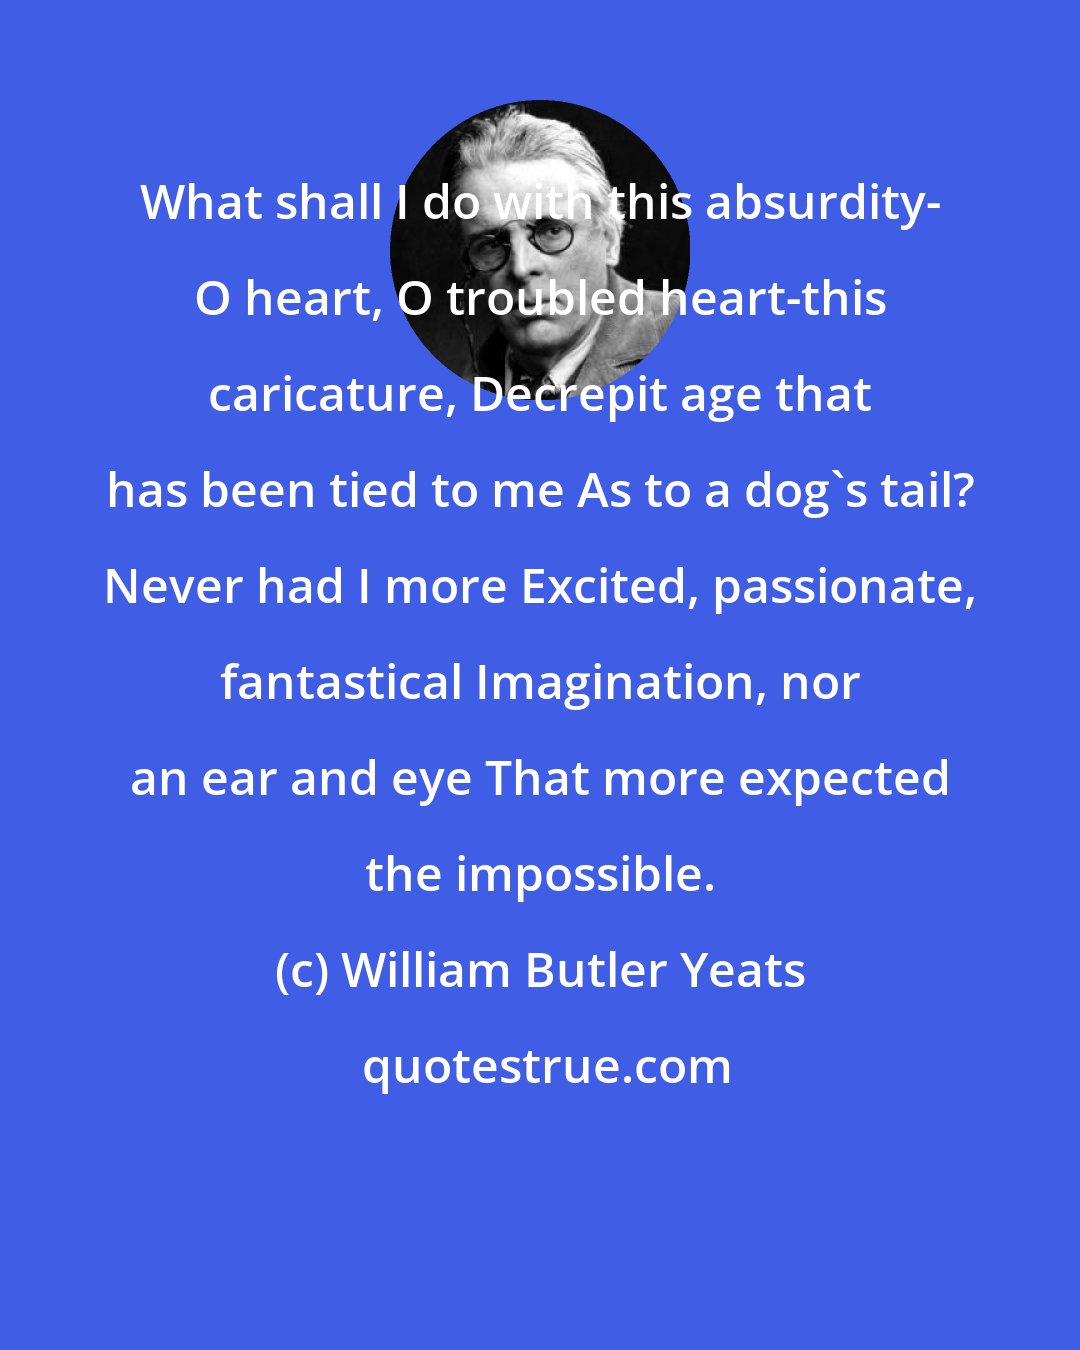 William Butler Yeats: What shall I do with this absurdity- O heart, O troubled heart-this caricature, Decrepit age that has been tied to me As to a dog's tail? Never had I more Excited, passionate, fantastical Imagination, nor an ear and eye That more expected the impossible.